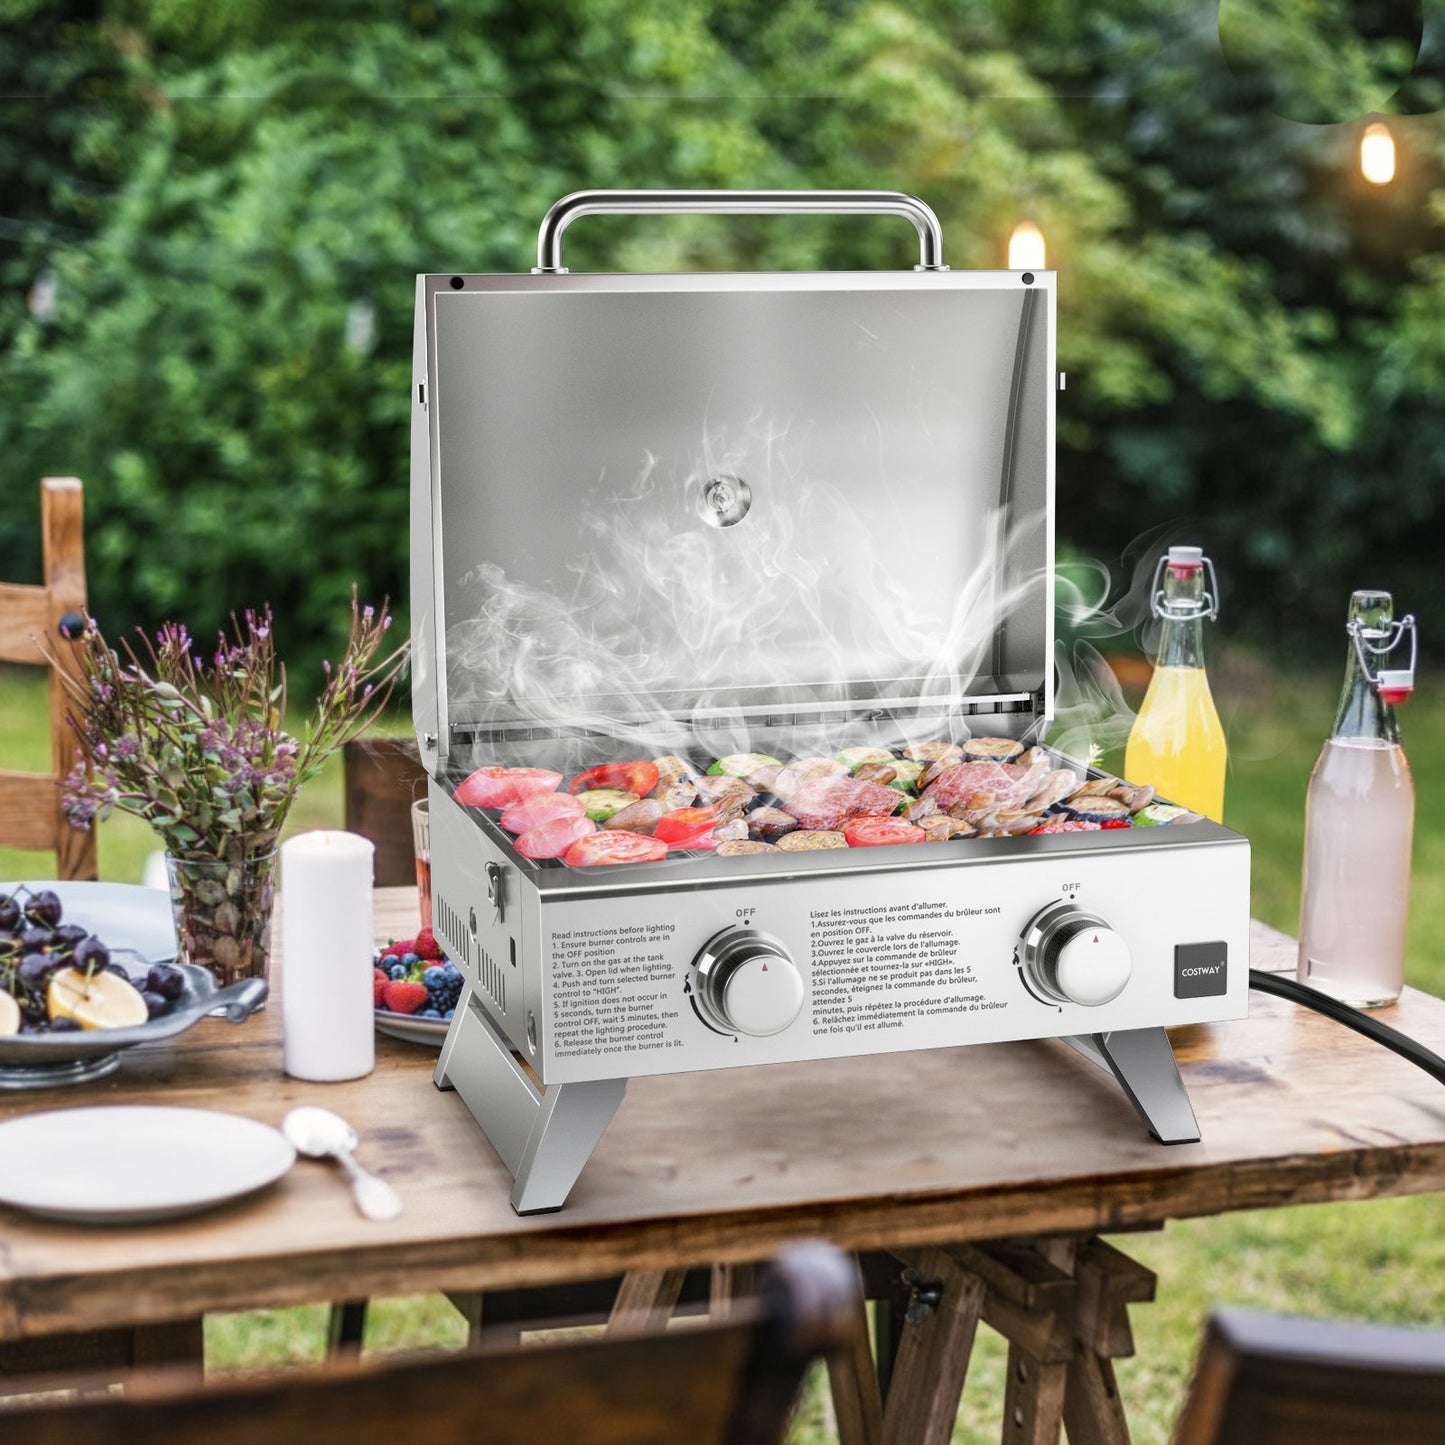 Stainless Steel Propane Grill with Lid for Outdoor Camping Tailgating Picnic Party, Silver